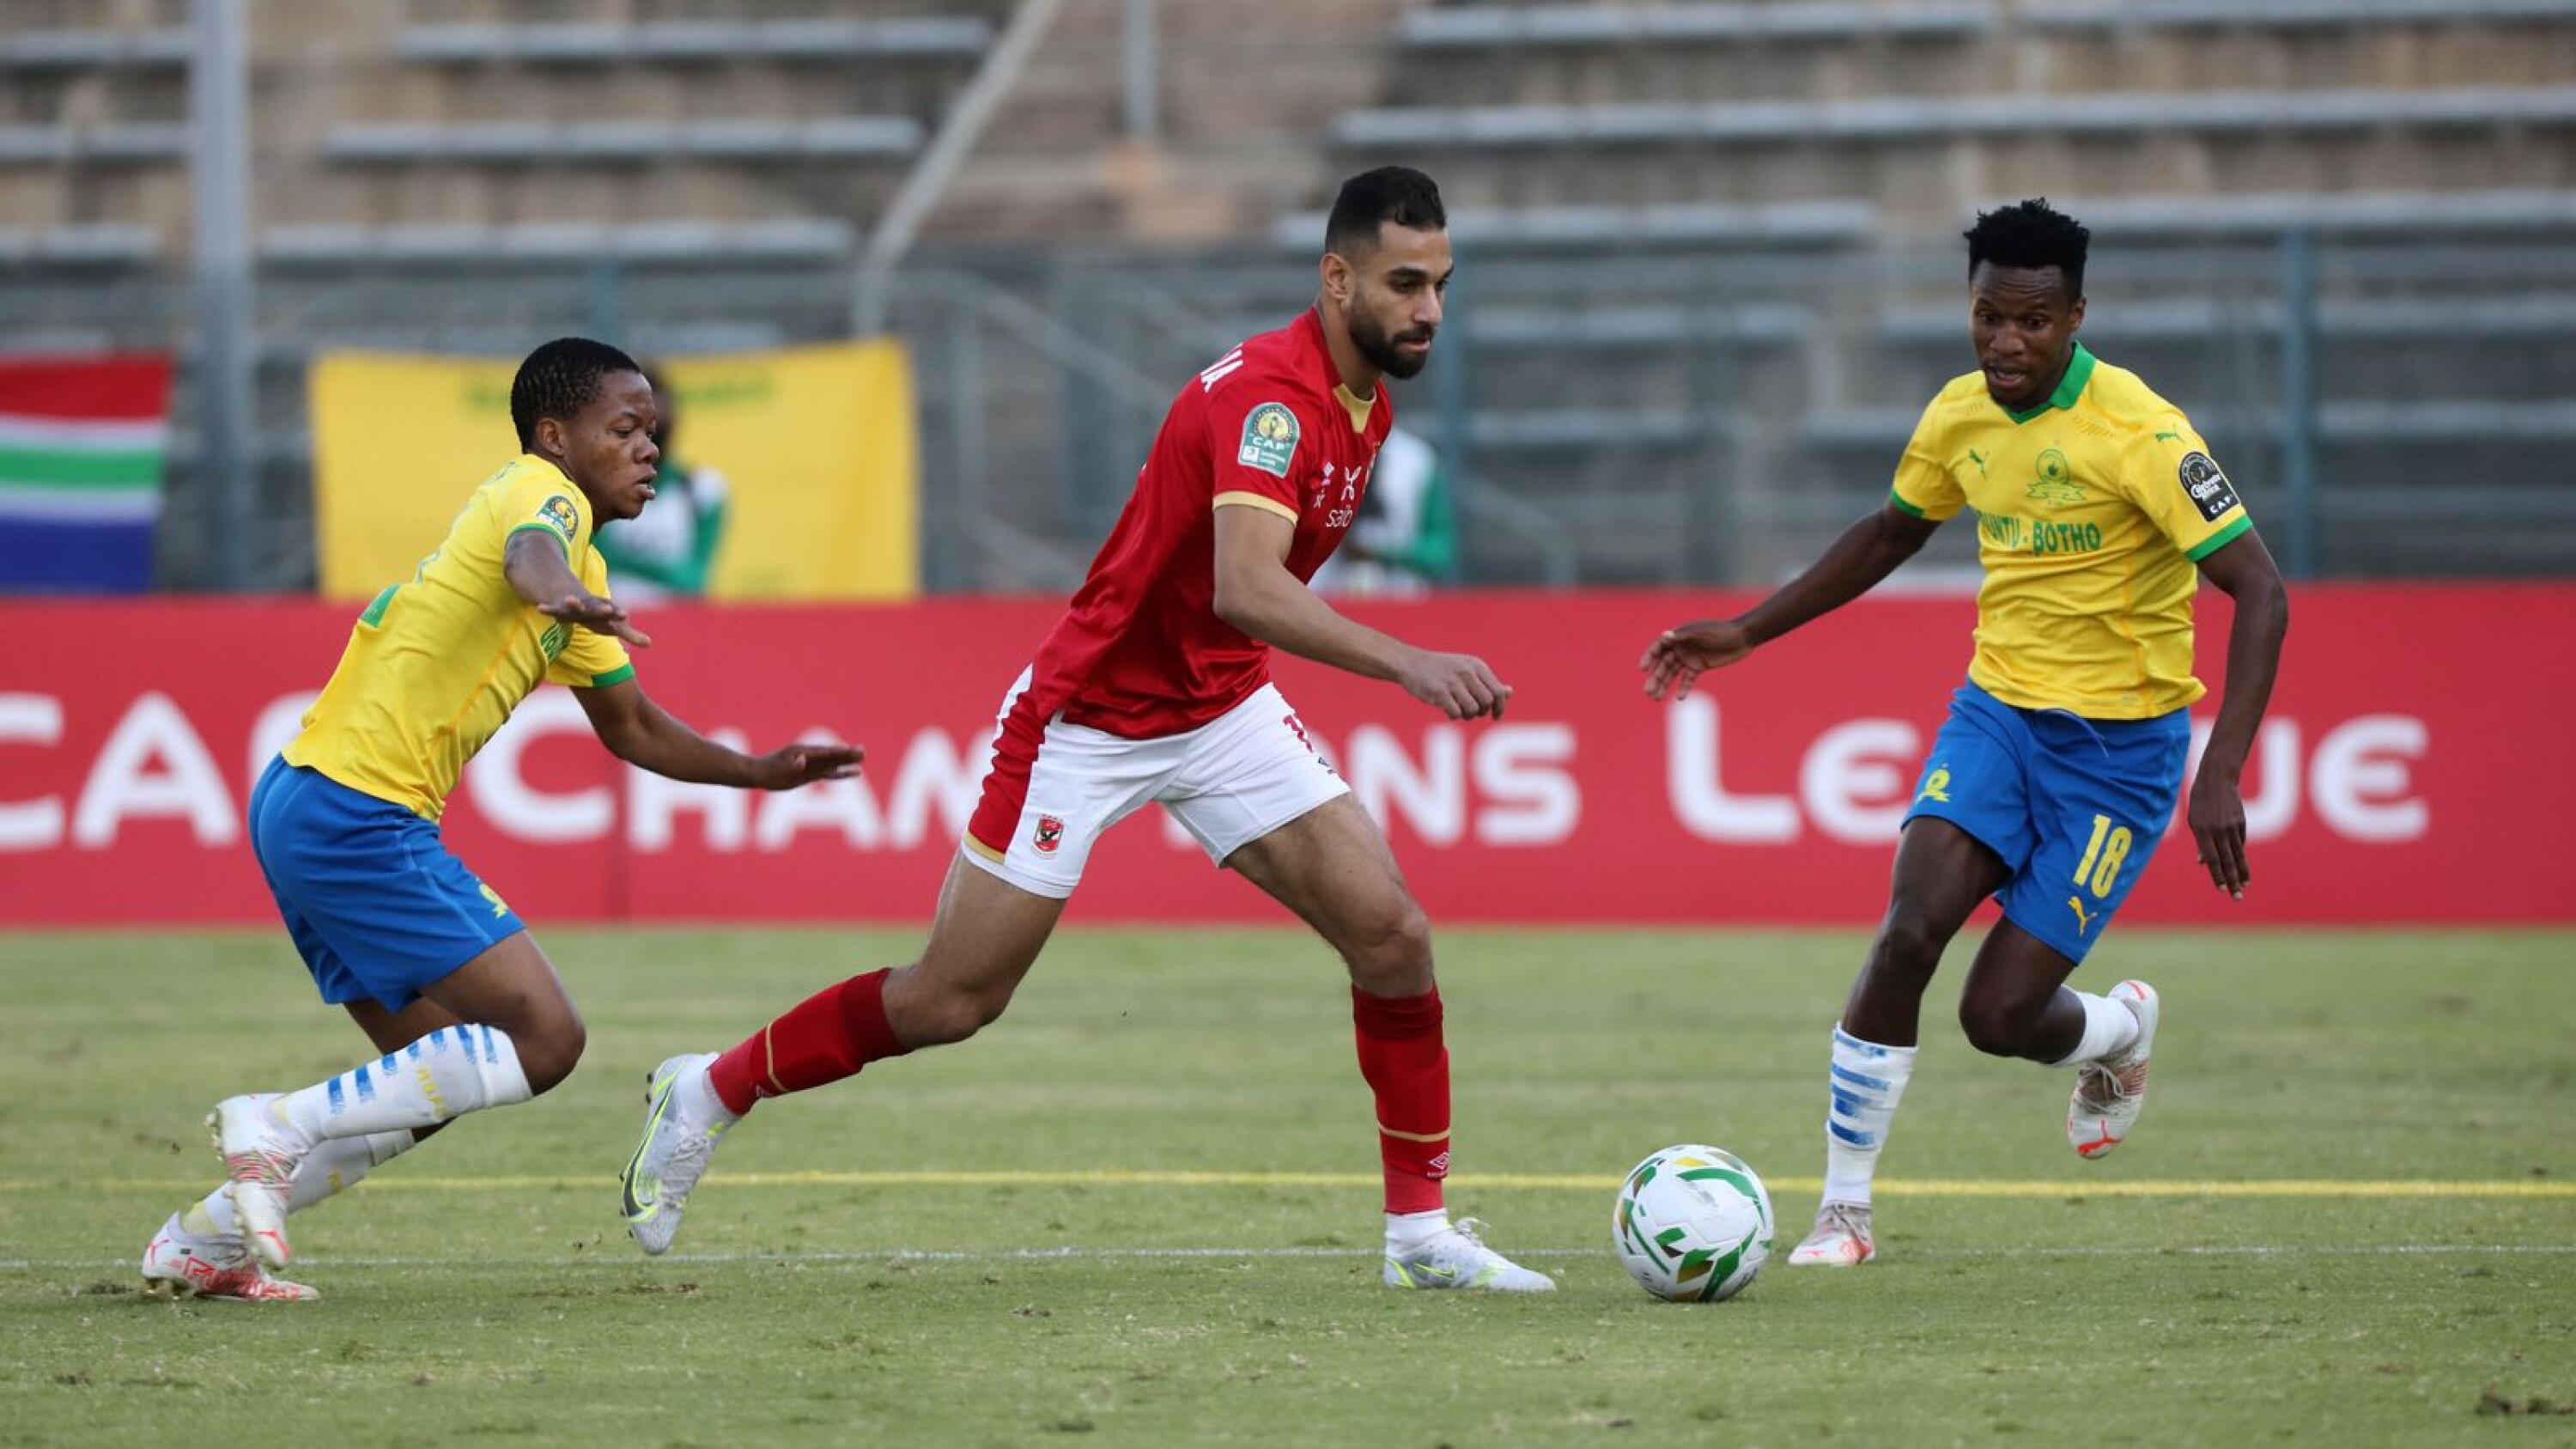 Amro Mohamed Elsoulia of Al Ahly runs with the ball and is  challenged by Sphelele Mkhulise and Themba Zwane of Mamelodi Sundowns during last year’s CAF Champions League quarter-final meeting at Lucas Moripe Stadium in Tshwane